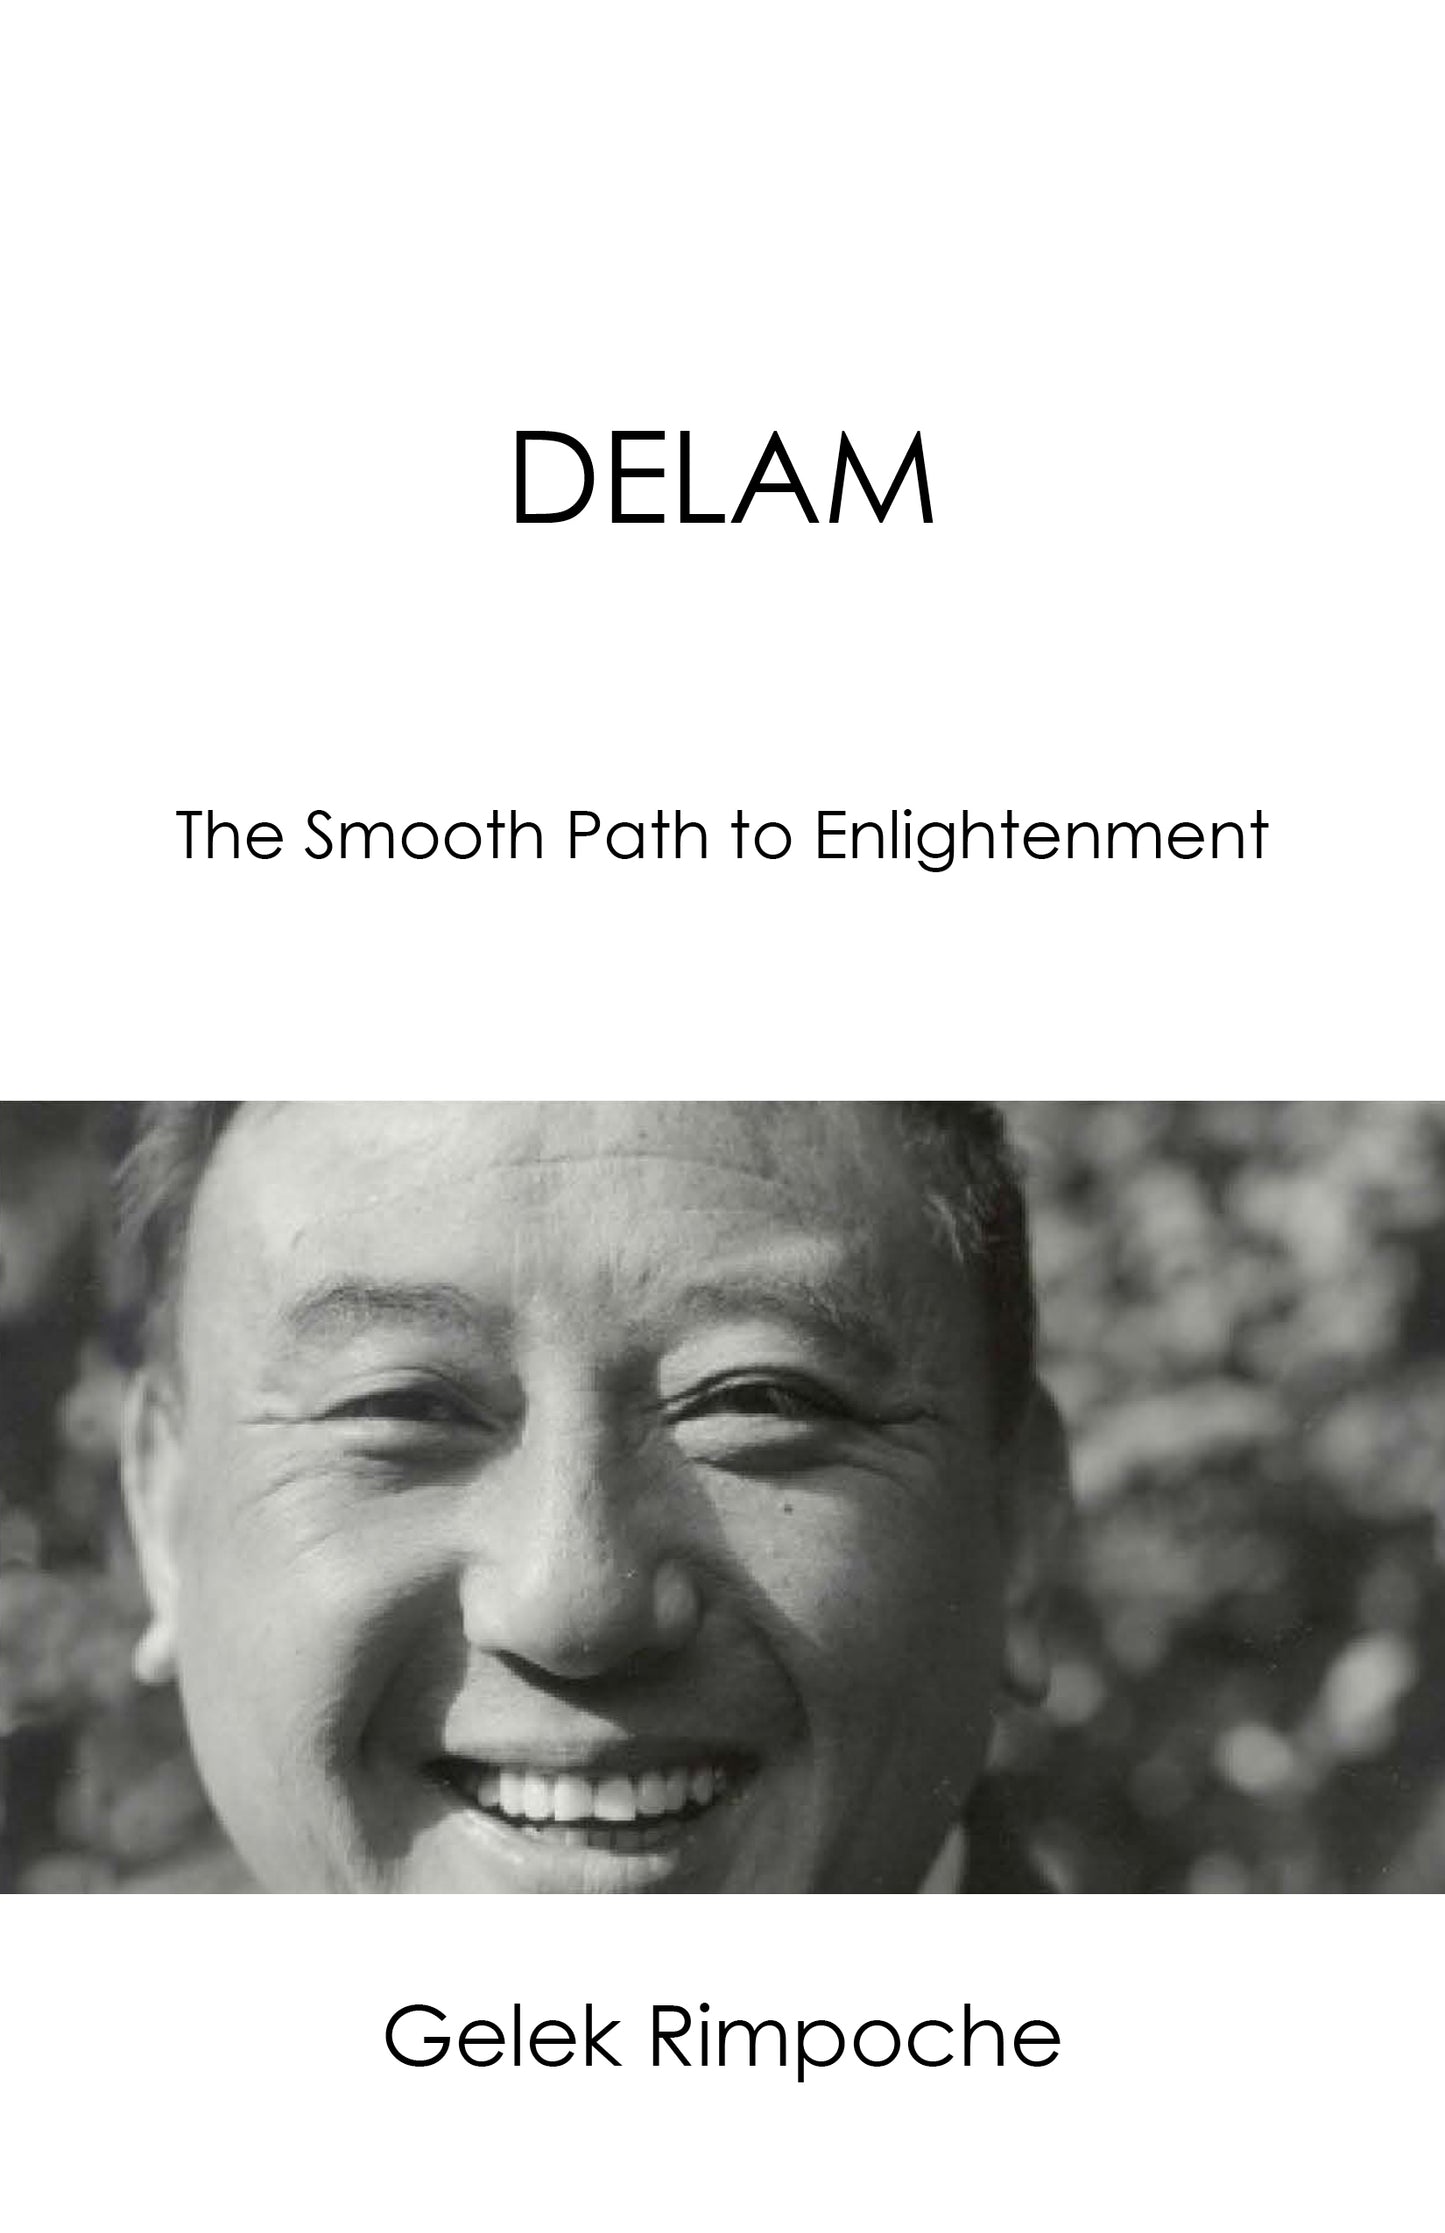 Delam The Smooth Path to Enlightenment